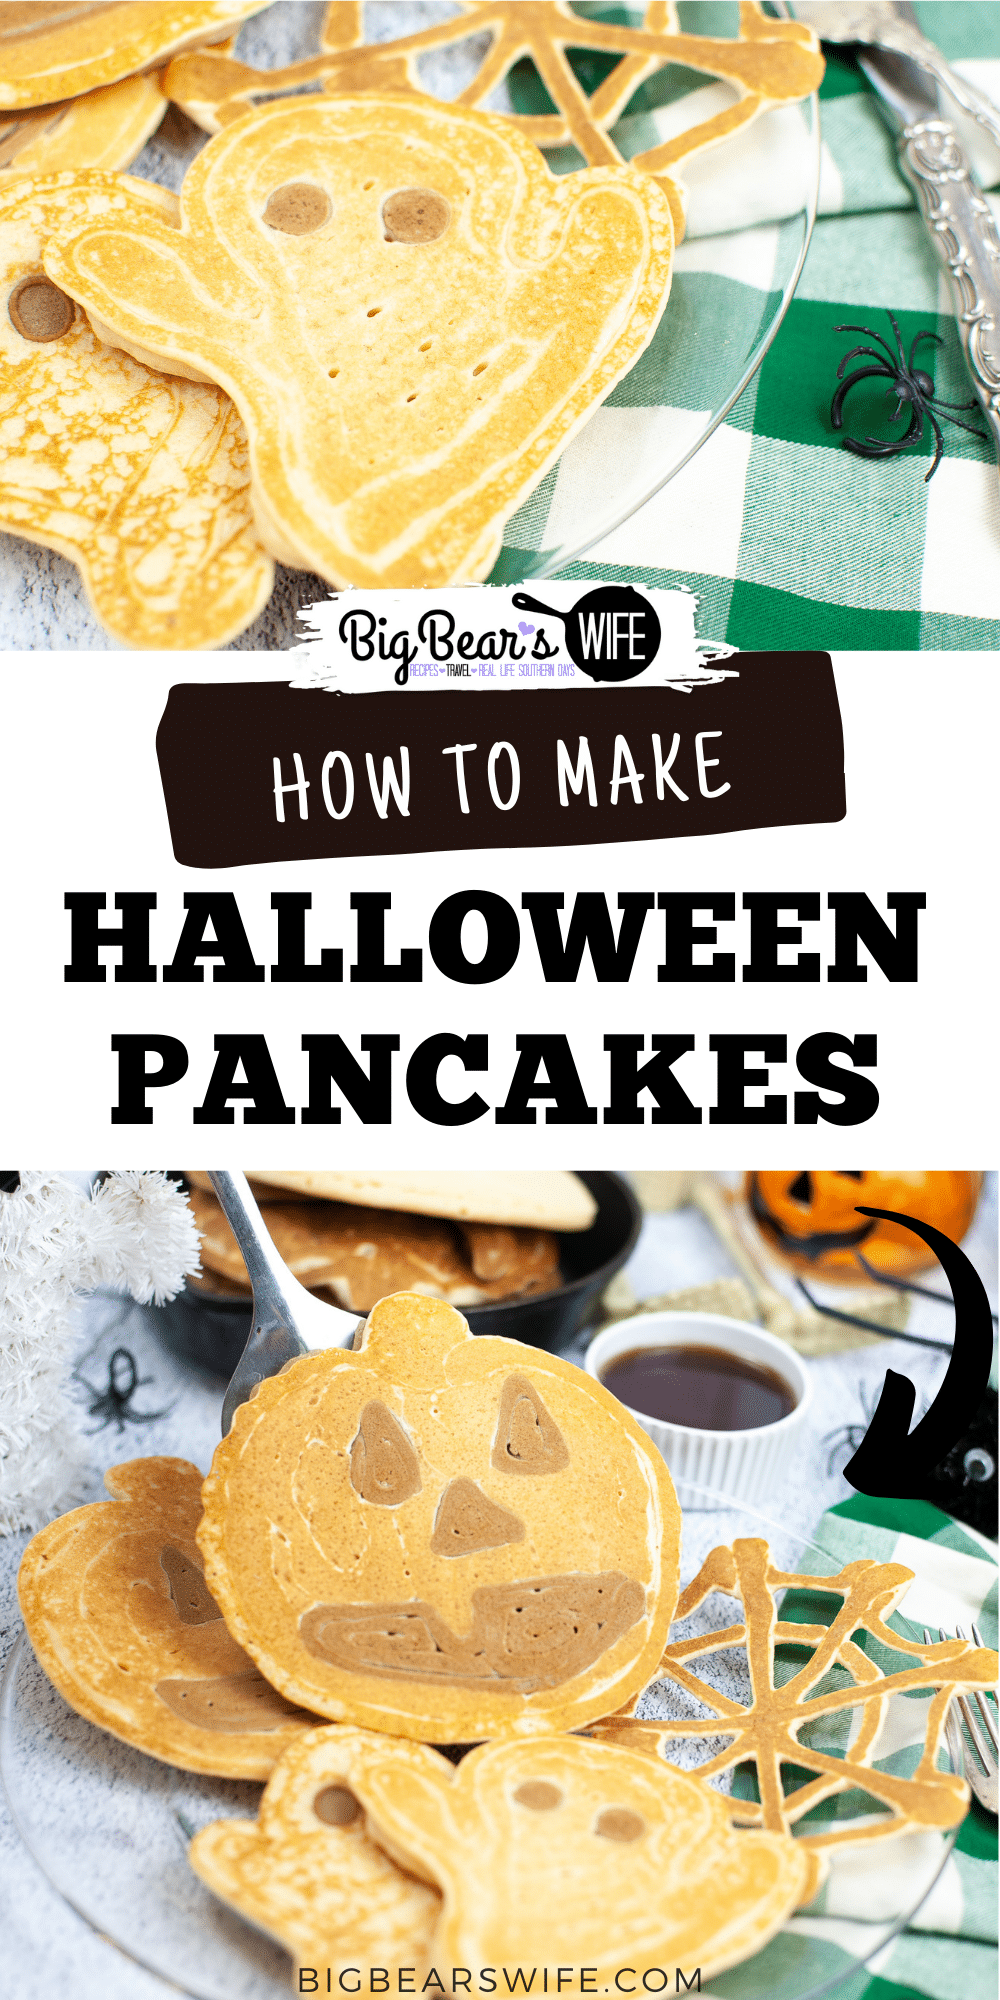 A Halloween breakfast that is perfect for any spooky Monster! These Halloween Pancakes are shaped like ghosts, pumpkins and spiderwebs! via @bigbearswife